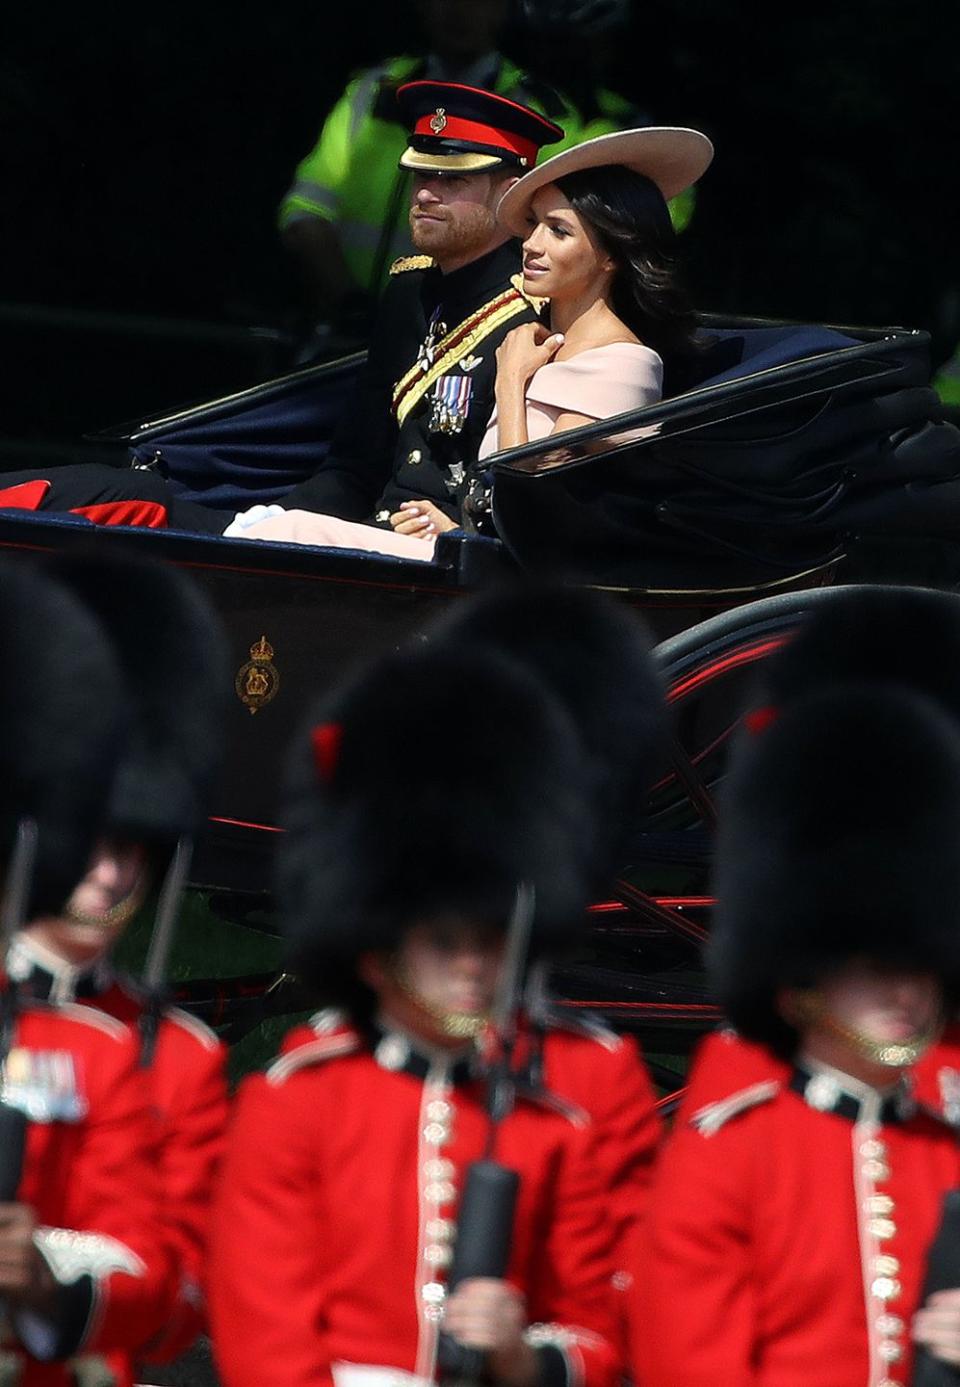 Meghan and Harry travel by carriage to the celebrations.